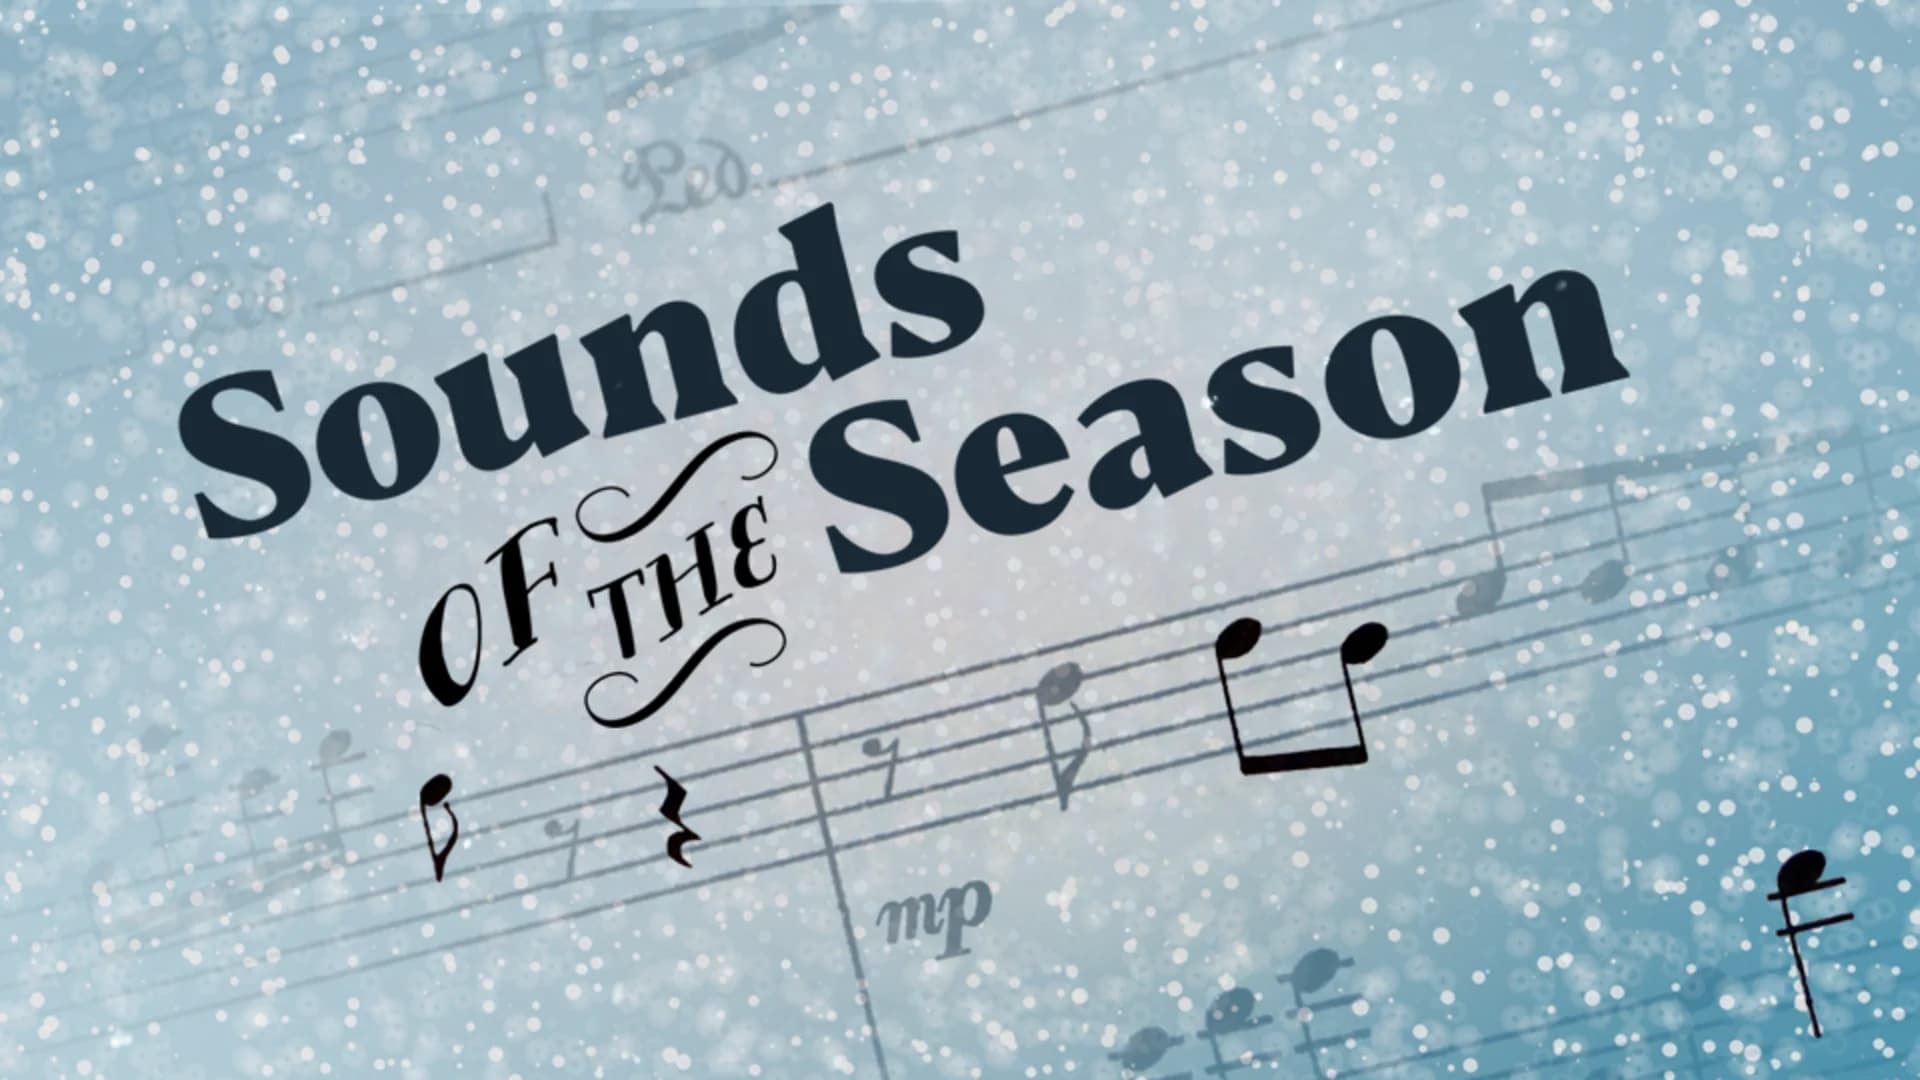 Sounds of the Season voting ends in Connecticut